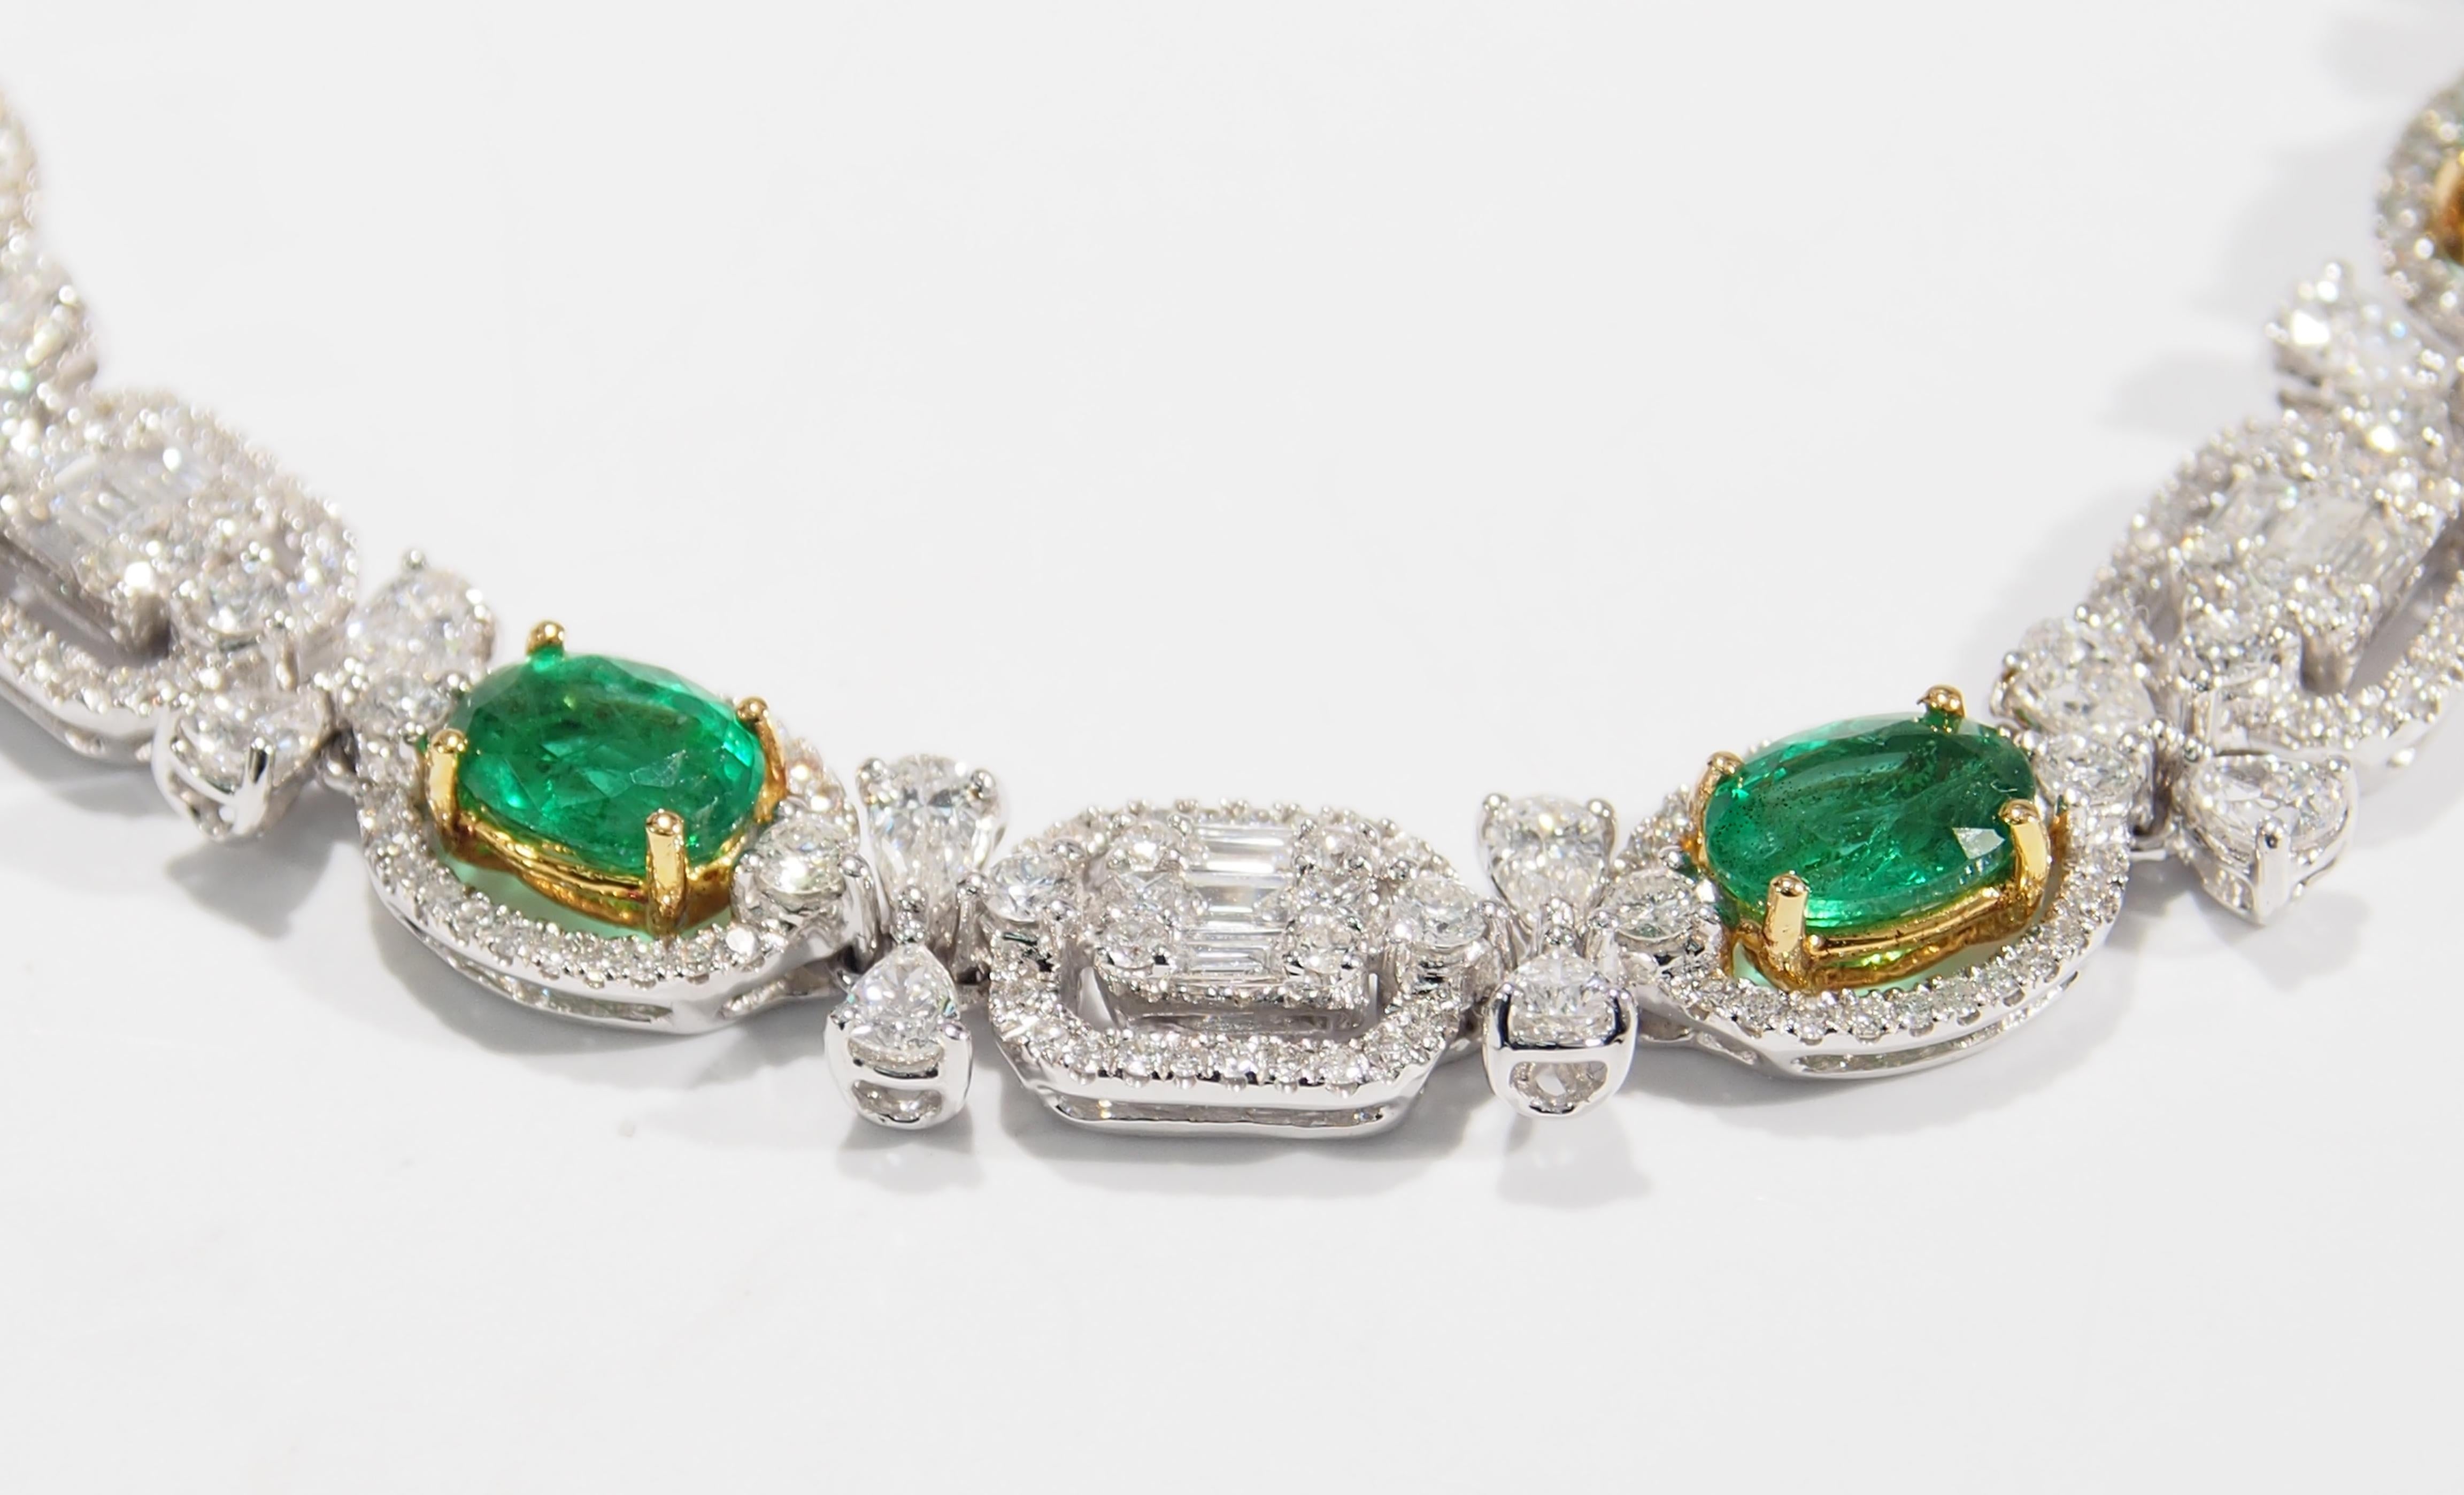 This is a lustrous Diamond and Emerald Bracelet fashioned in 18K White Gold. There are 6 Oval Emeralds, approximately 4.80ctw that are accented by 387 Sparkling Diamonds, G-H in Color, VS in Clarity. The 7 inch in length, 1/4 inch in width Bracelet